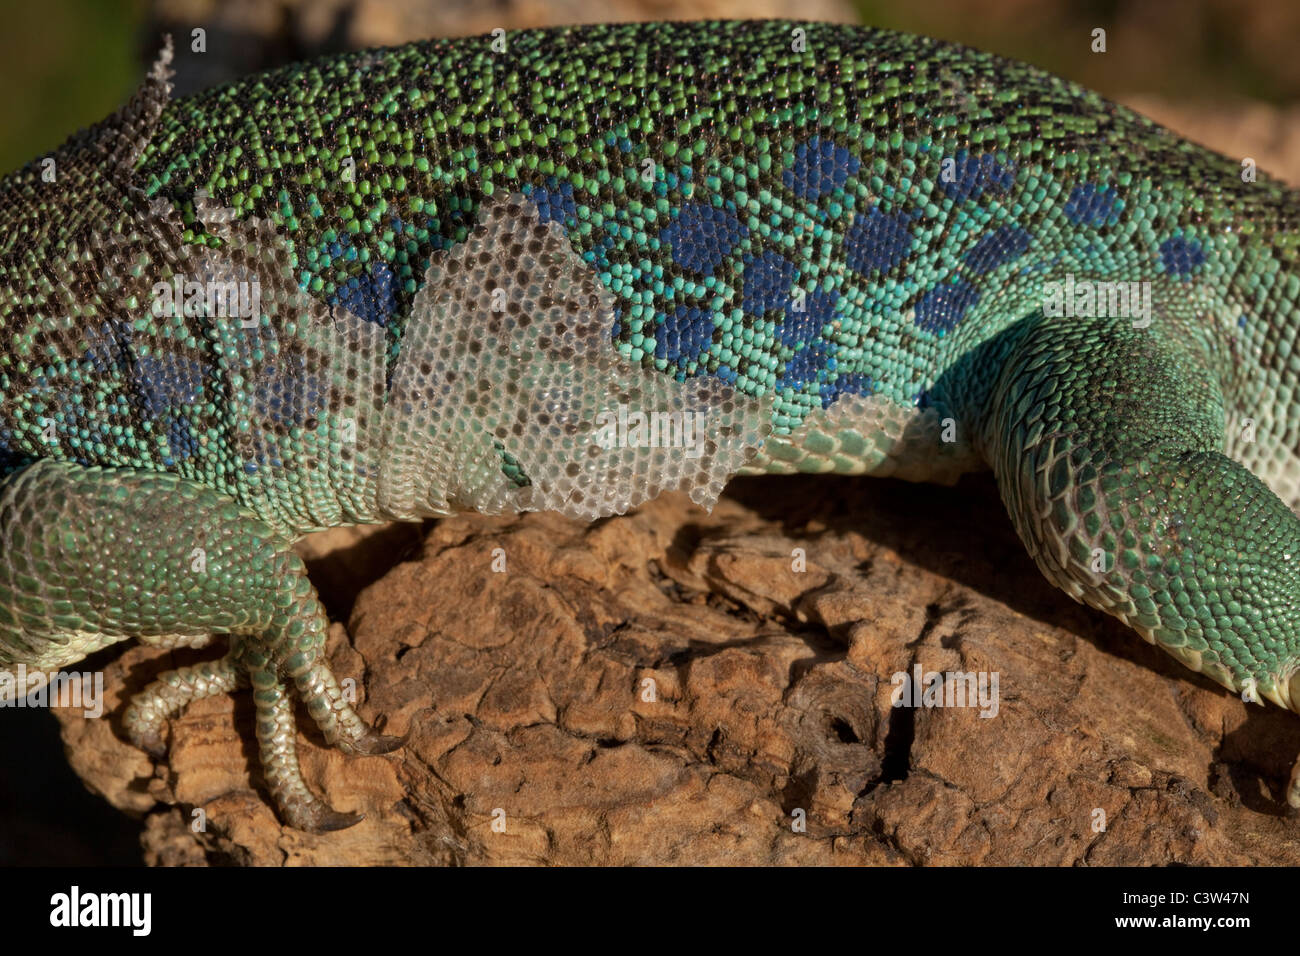 European Ocellated or Eyed Lizard (Timon lepidus). Showing sloughing of skin in pieces on flank of body. Stock Photo